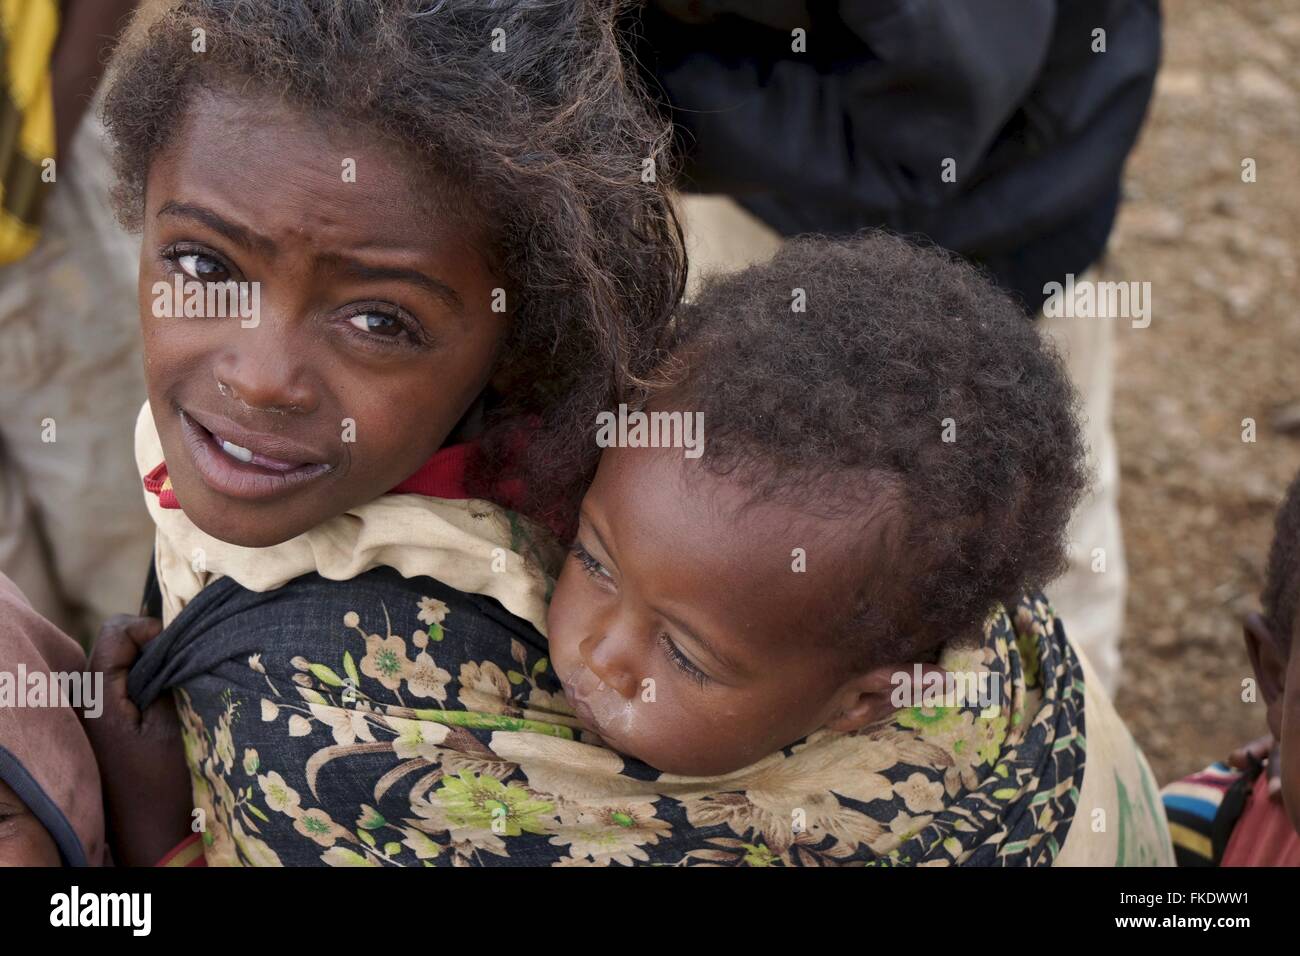 A young Ethiopian girl carries her brother on her back at a market Stock Photo